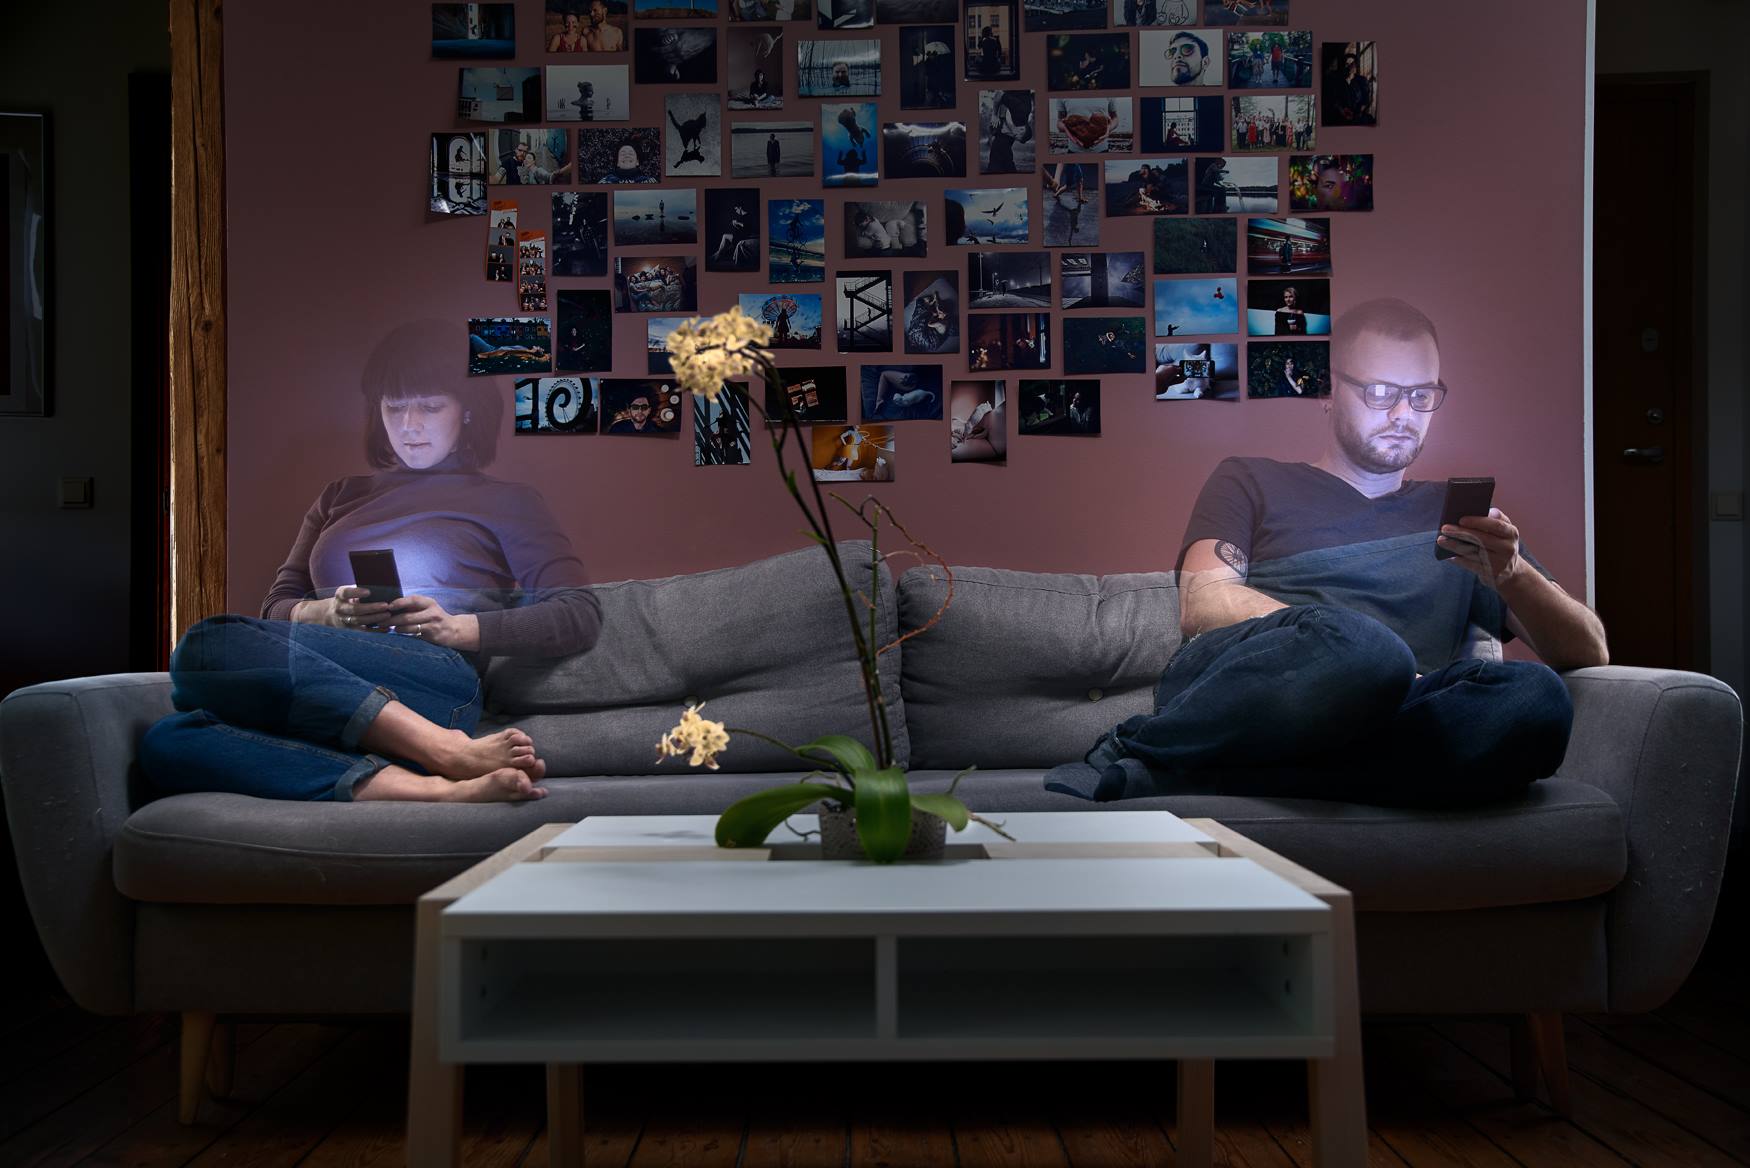 The "Disconnecting Connection" Project Illustrates The Harsh Reality Of The Time